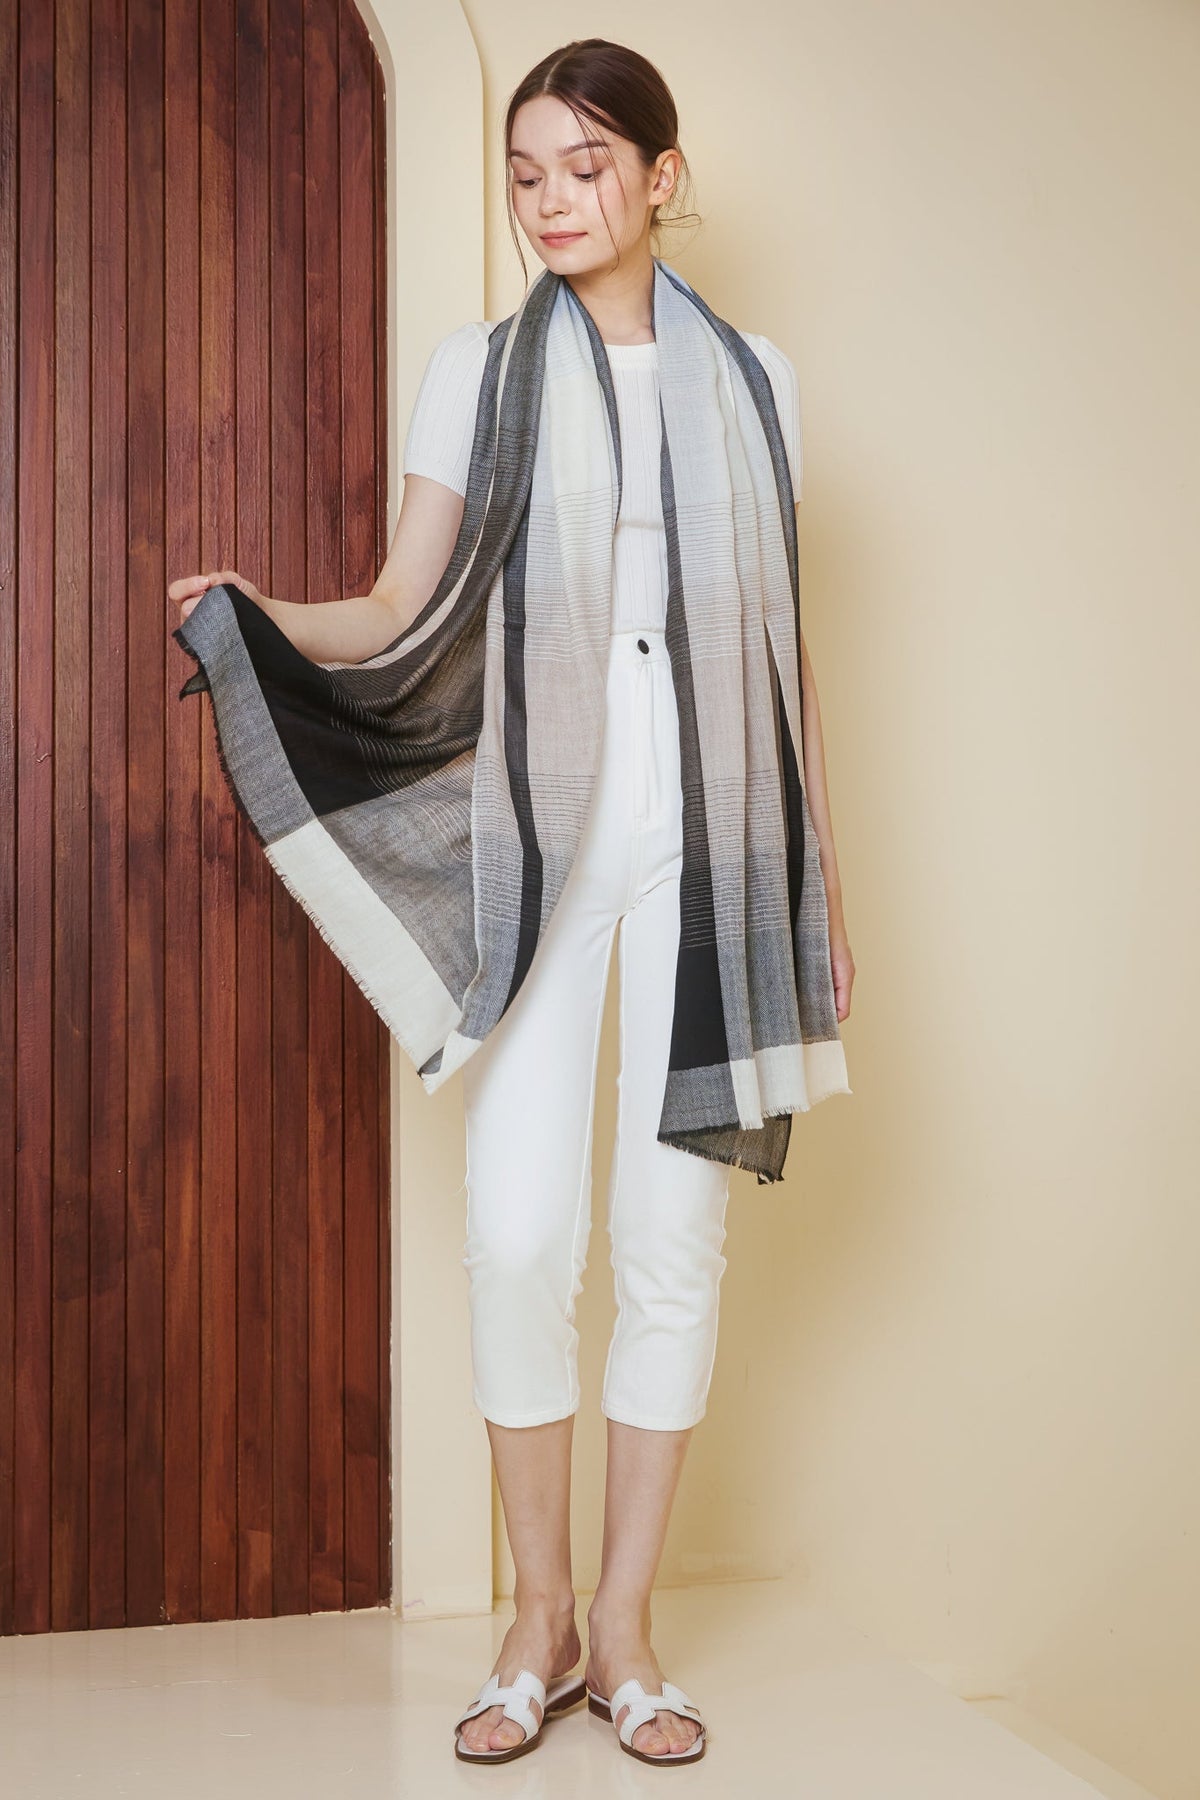 Restocked* Luxe Cashmere Shawl in Blue Grey Gradient